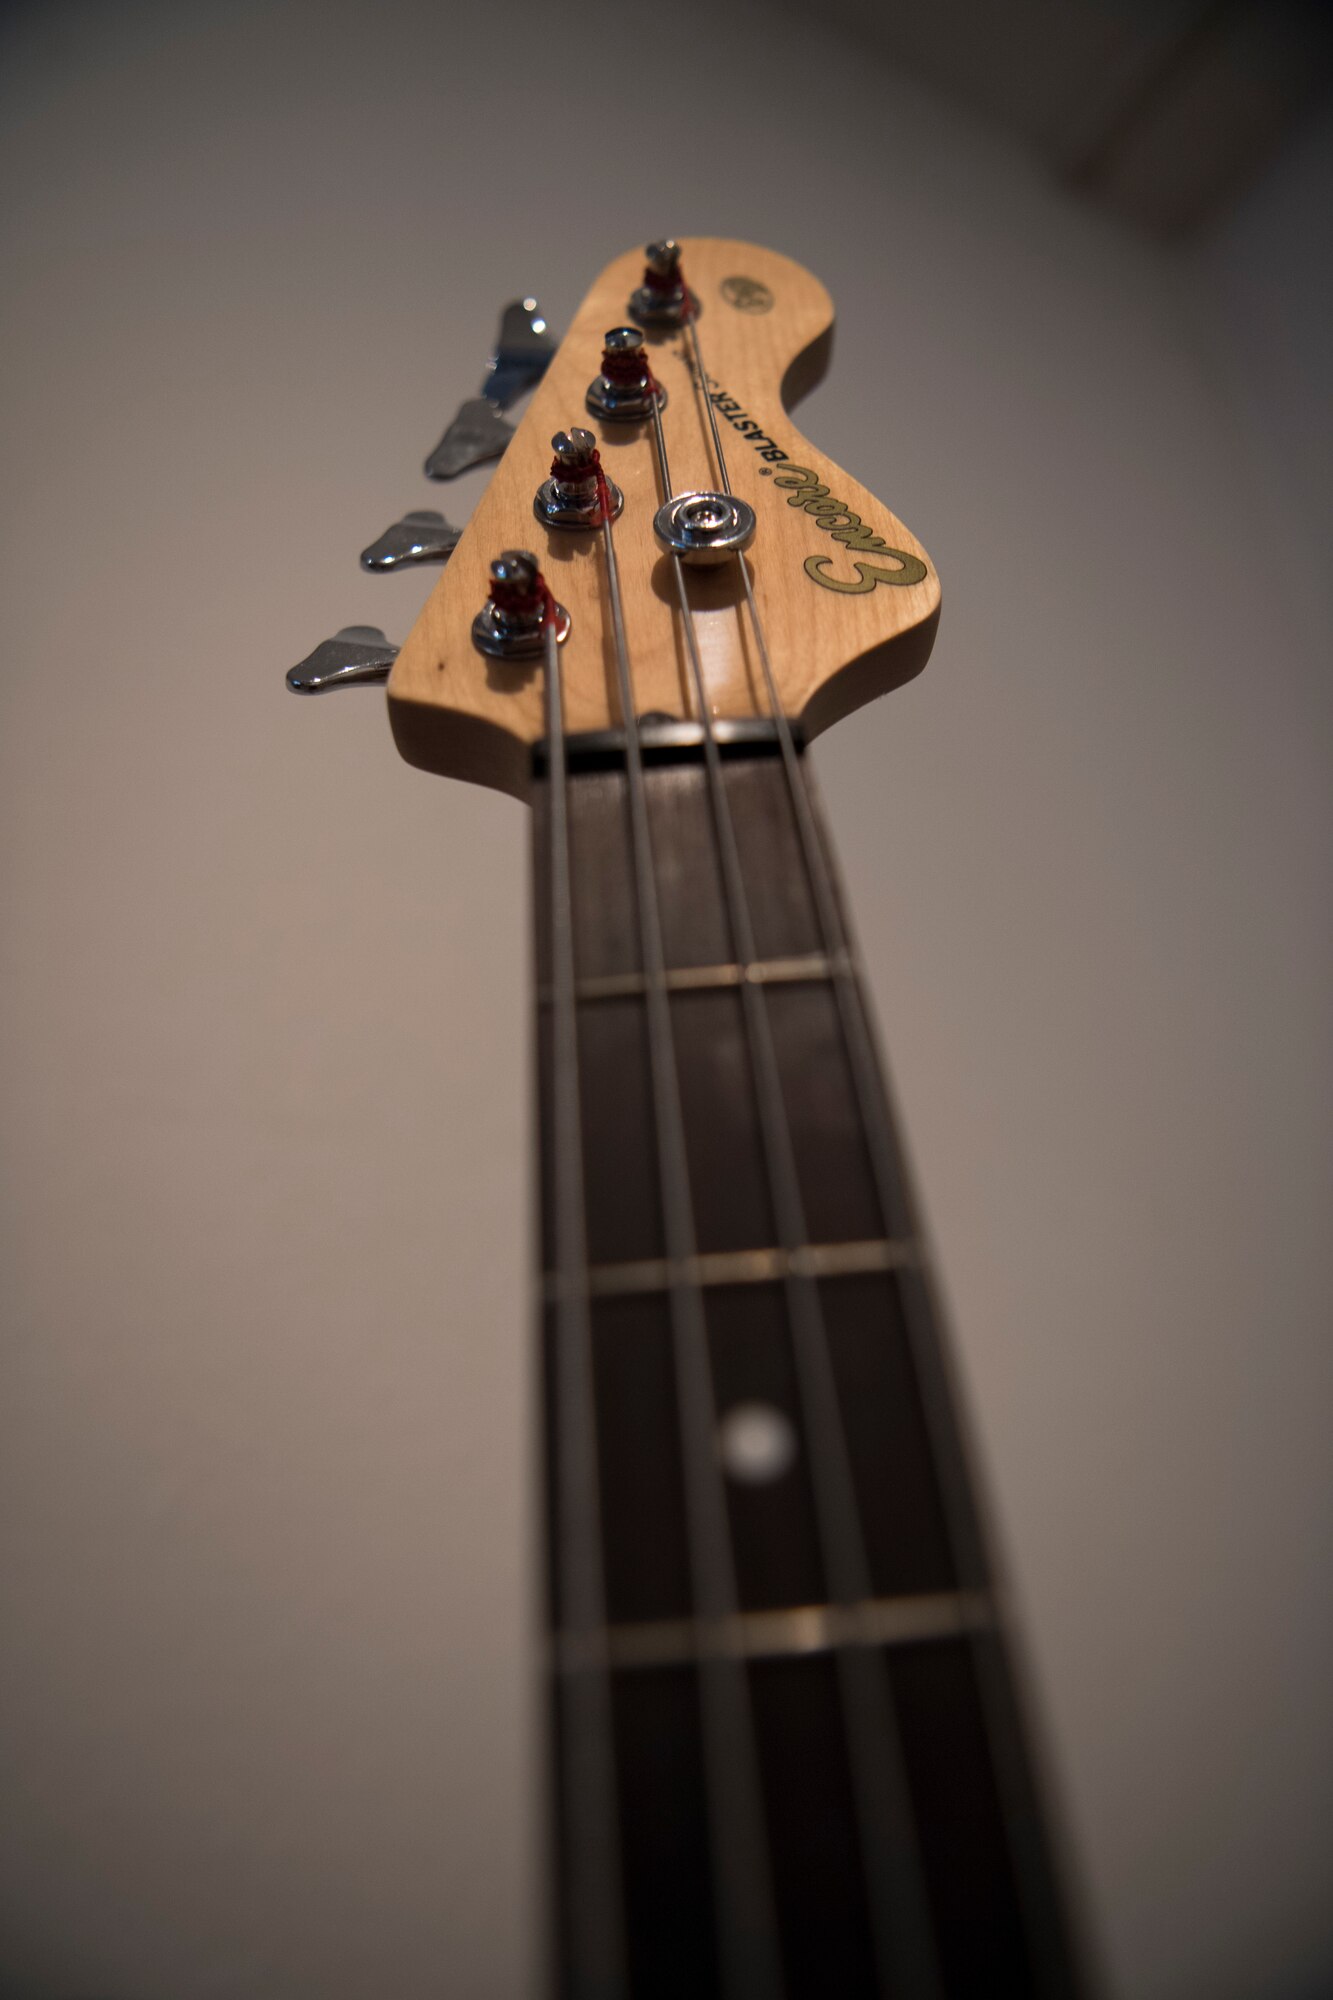 A bass guitar sits in Kaiserslautern, Germany, April 8, 2020.